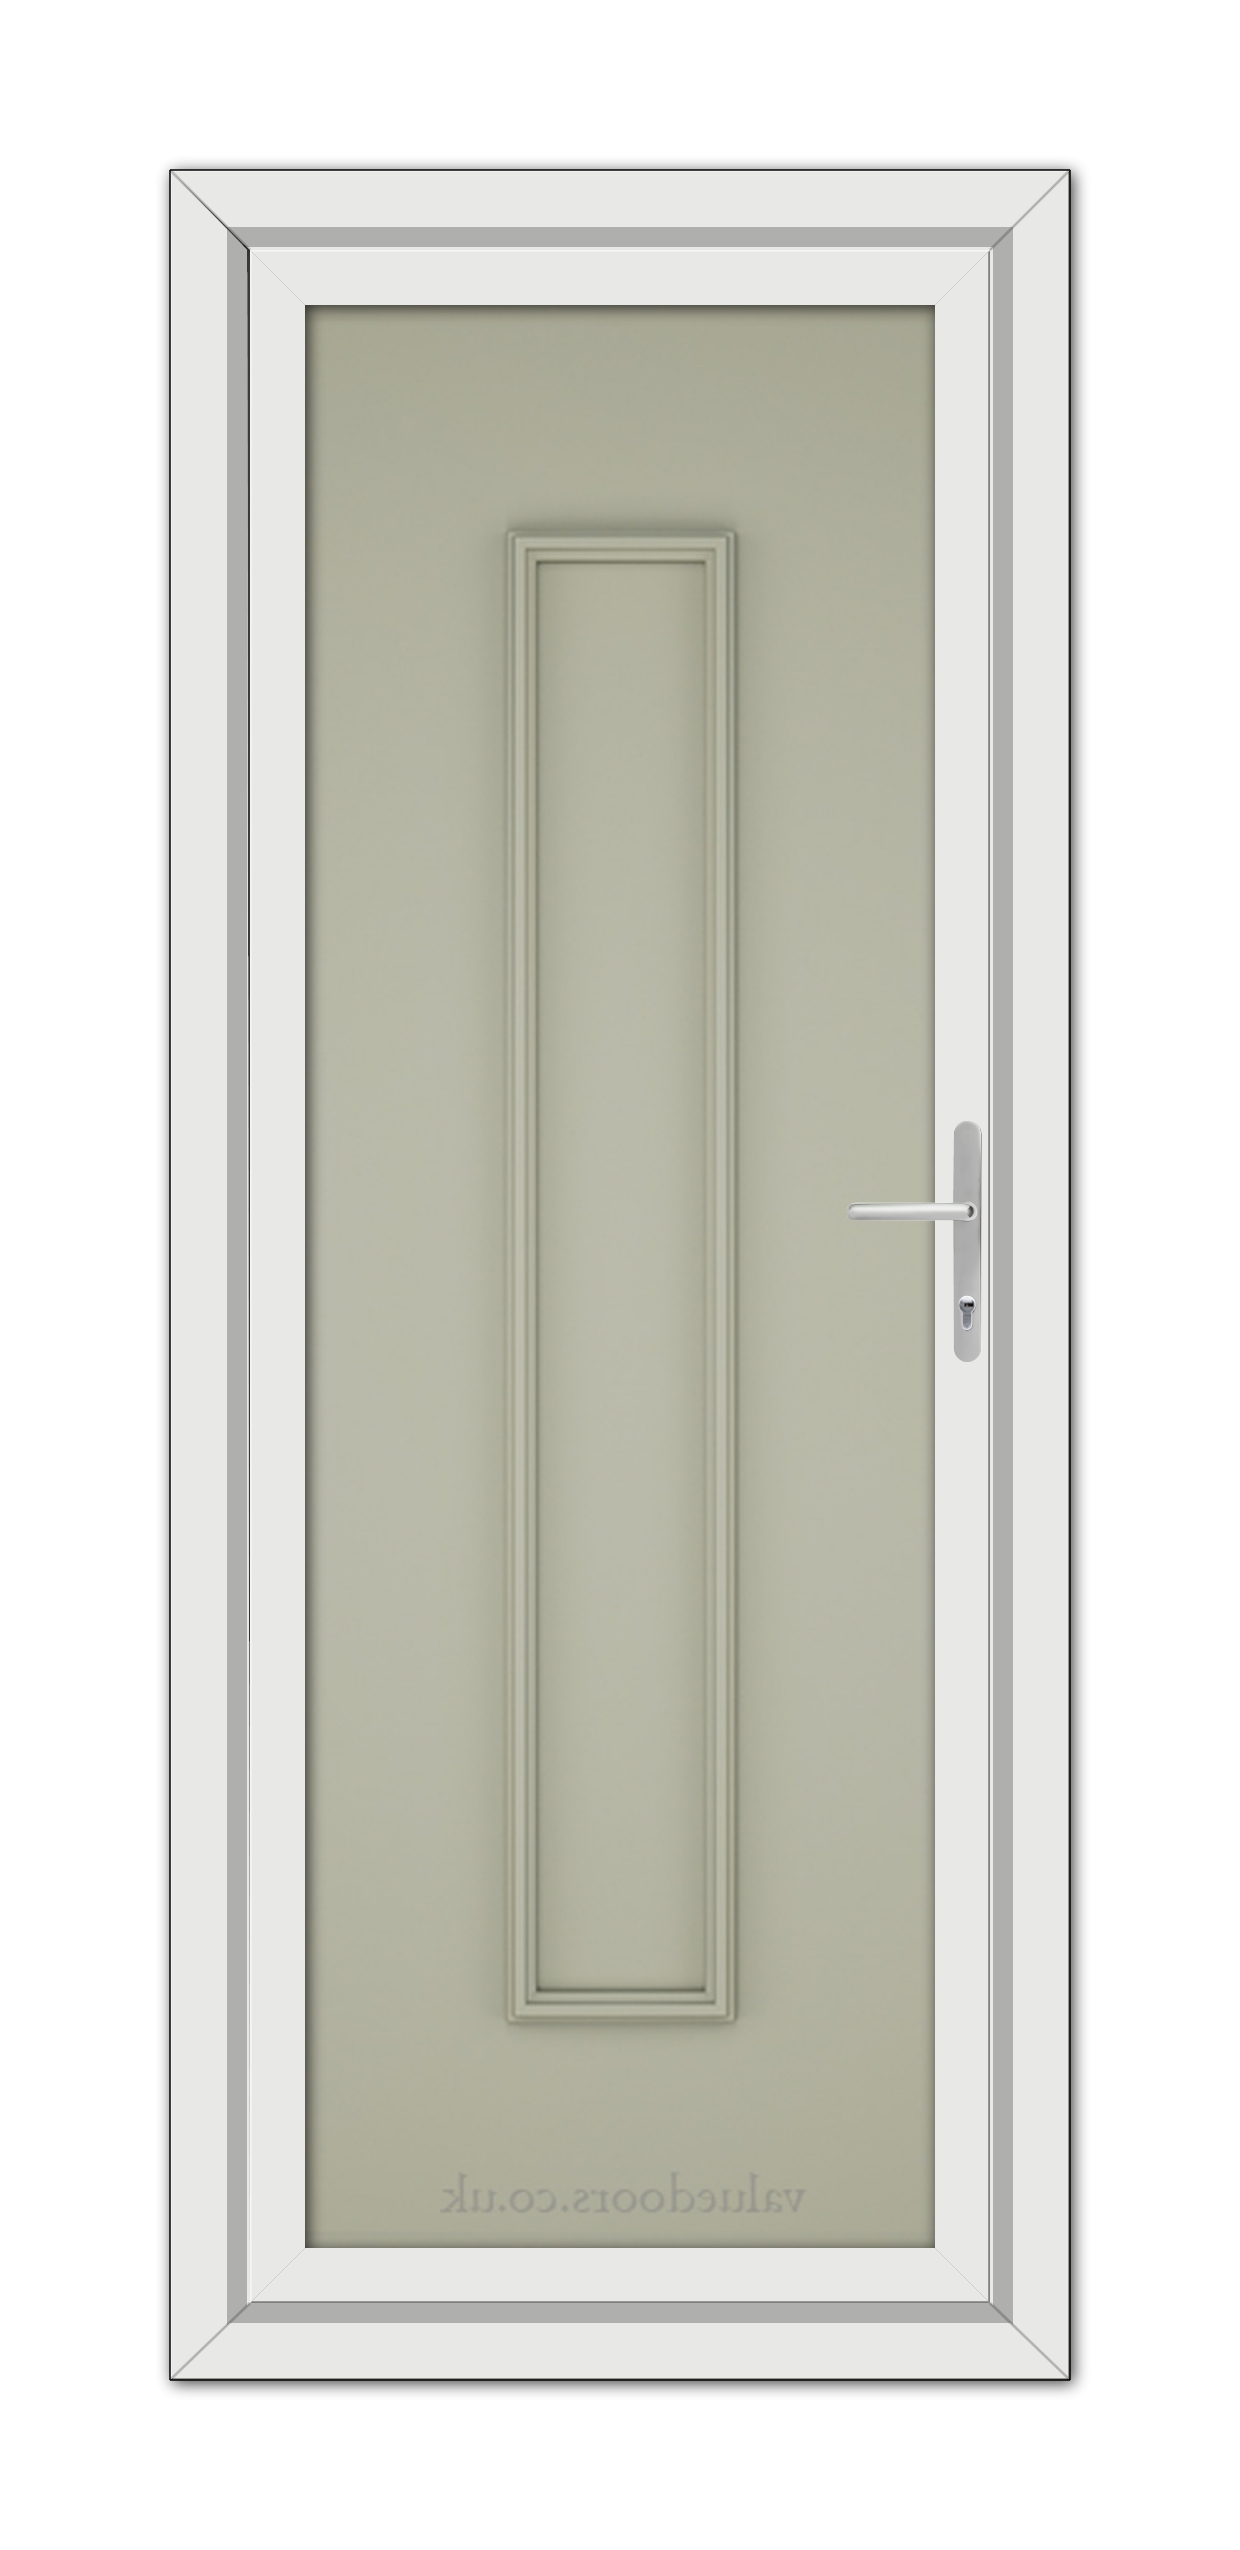 A vertical image of an Agate Grey Rome Solid uPVC Door with a long, centered rectangular panel and a silver handle, set within a white frame.